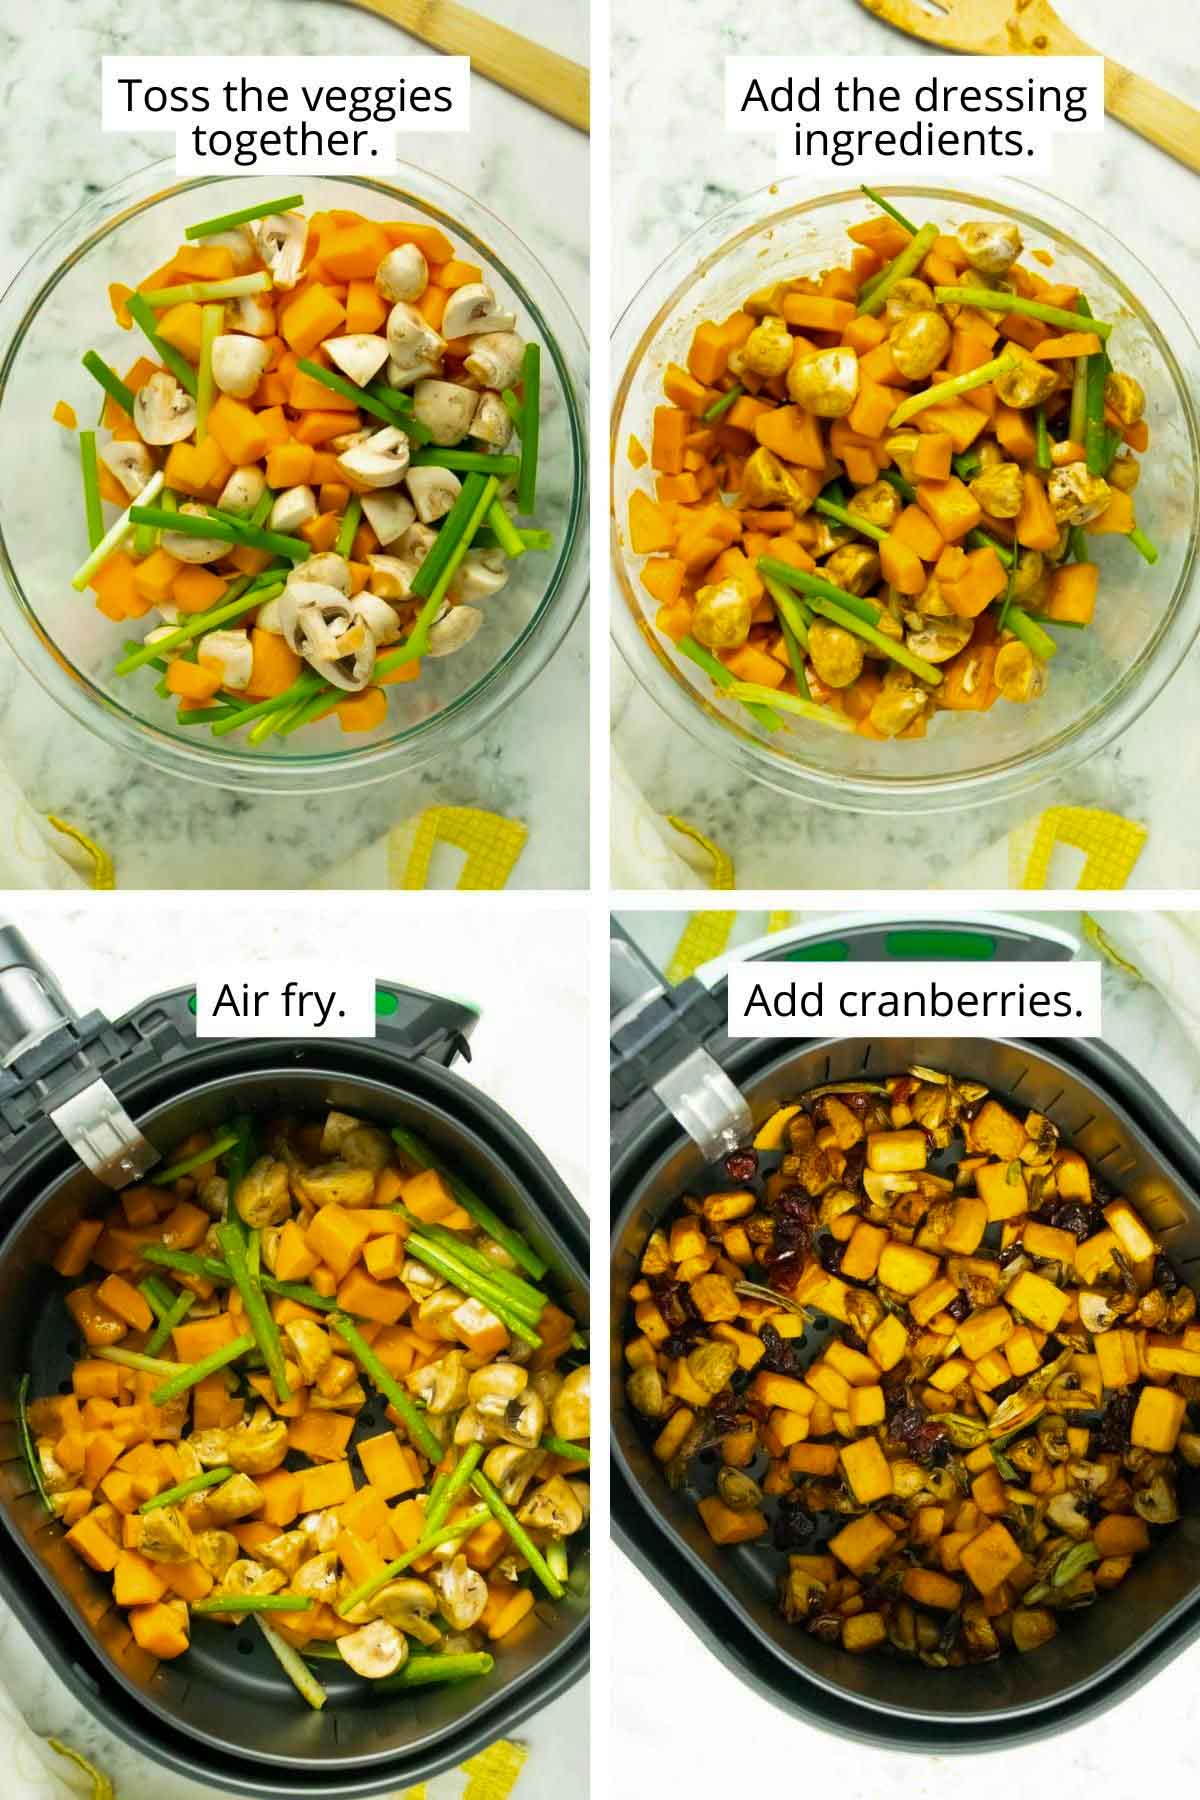 image collage showing the cut veggies before and after adding dressing, veggies in the air fryer before and after cooking